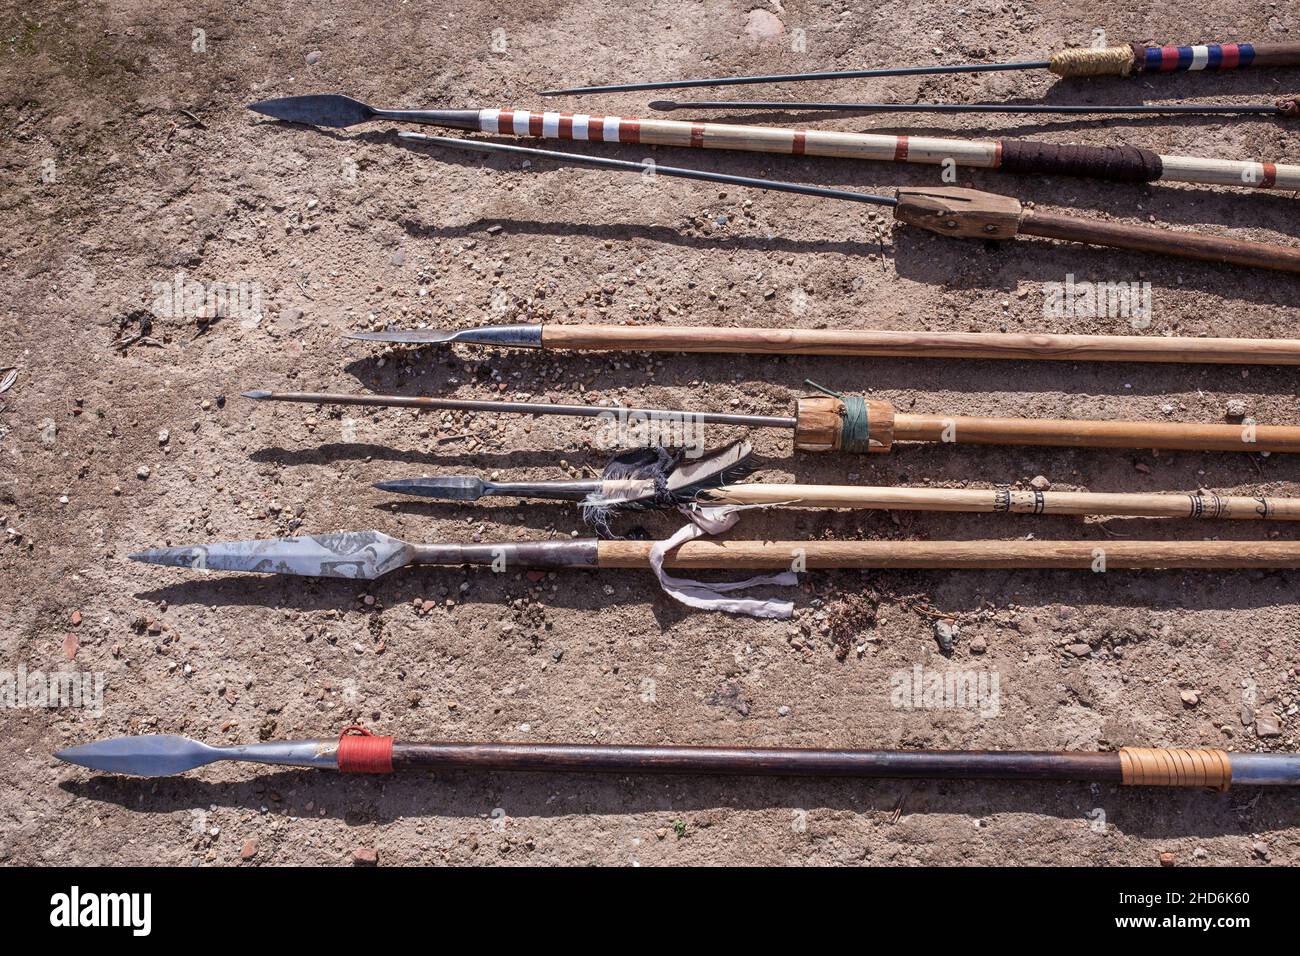 Different type of spears and javelins from ancient times. Replicas of pre-roman and early roman Iberian peninsula weapons. Stock Photo